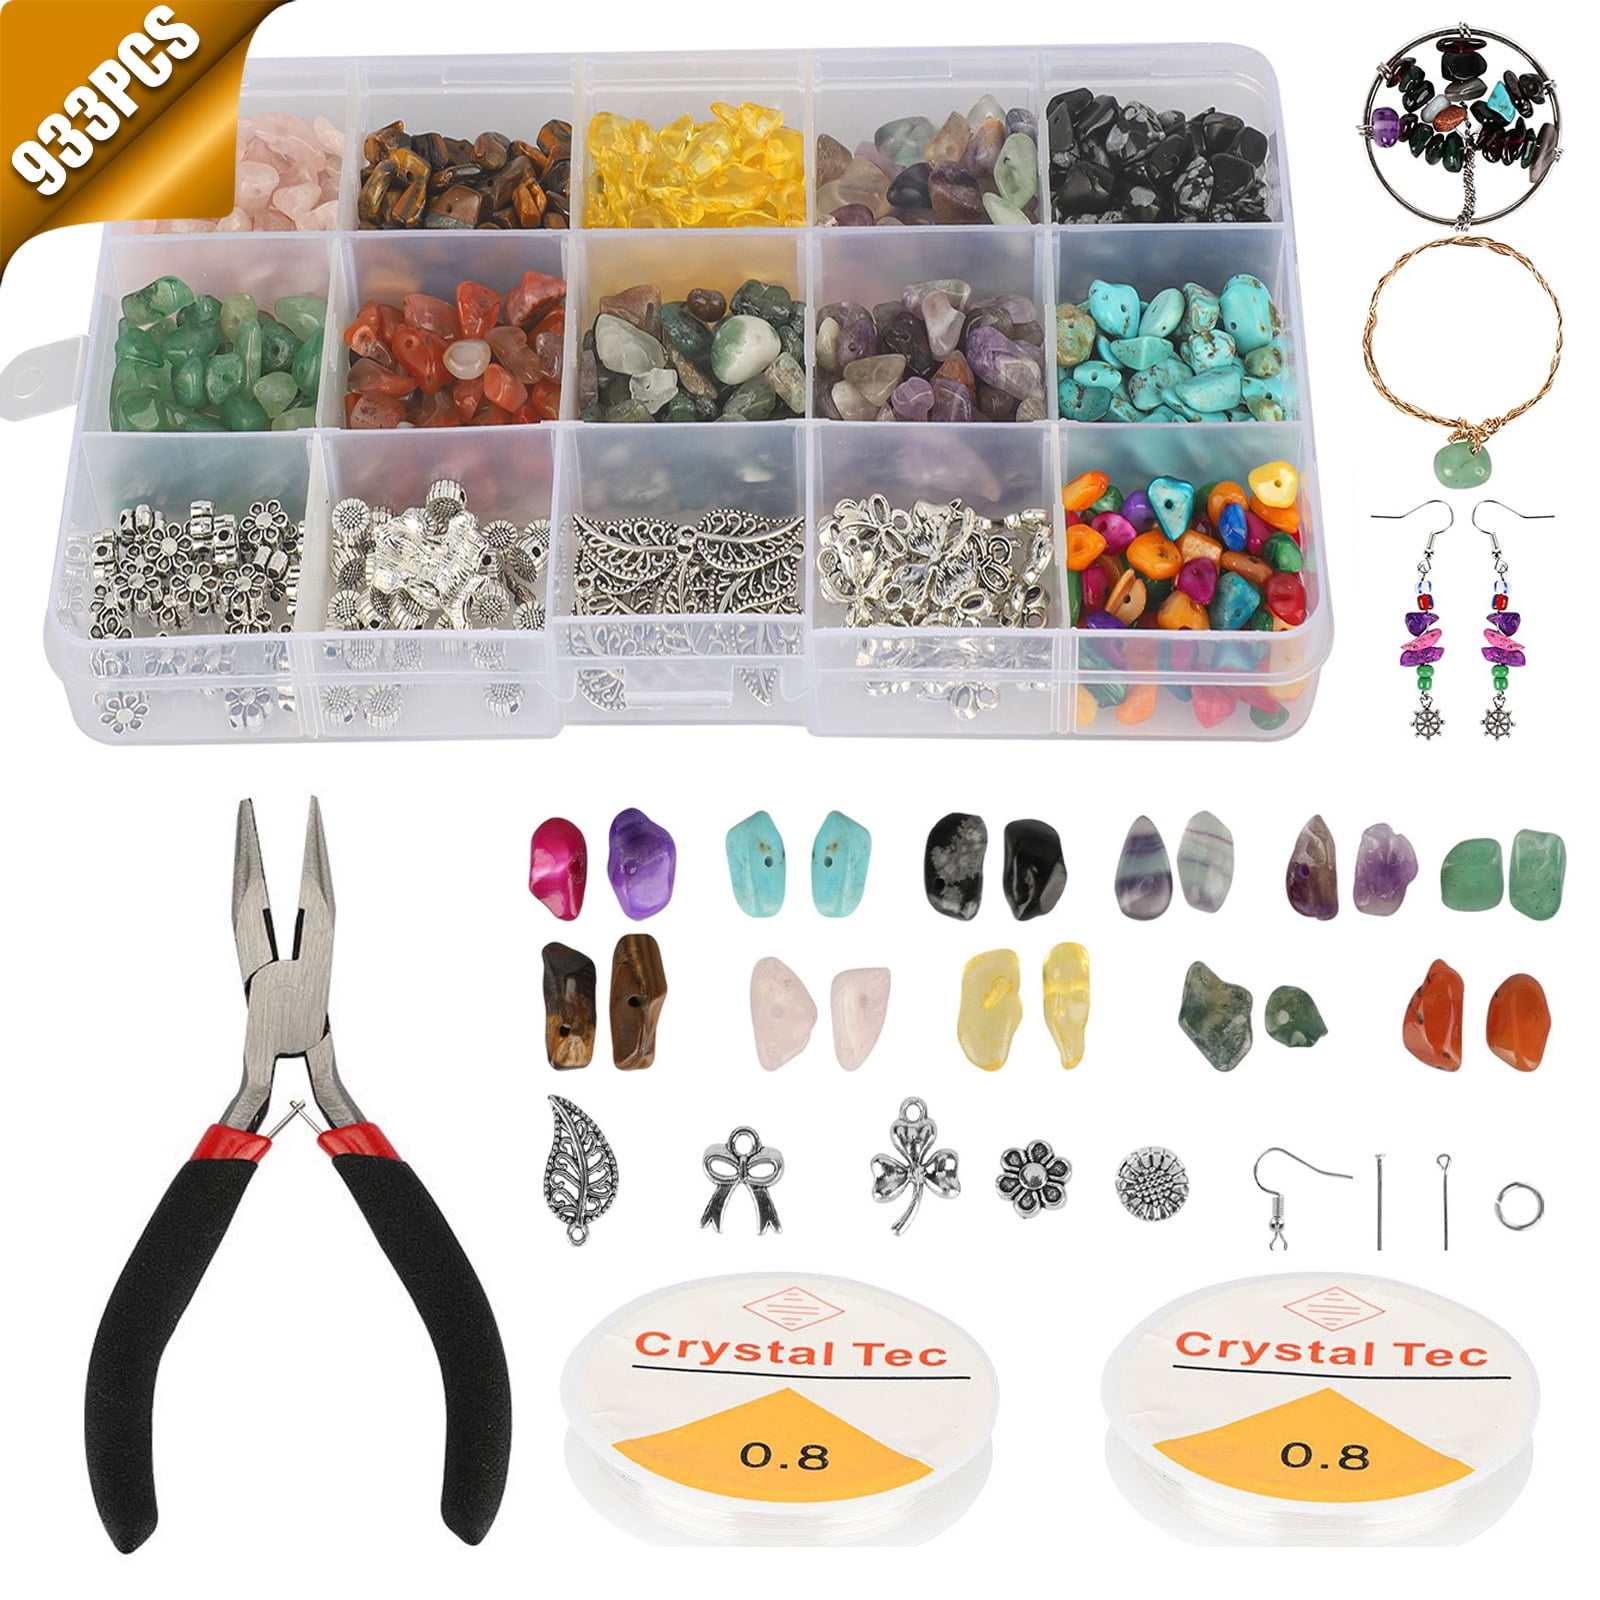 EEEkit Jewelry Making Supplies, Jewelry Making Accessories Tool Kit Set Beading Wire Brass Ring Tweezer Pliers with Carrying Box for DIY Starter